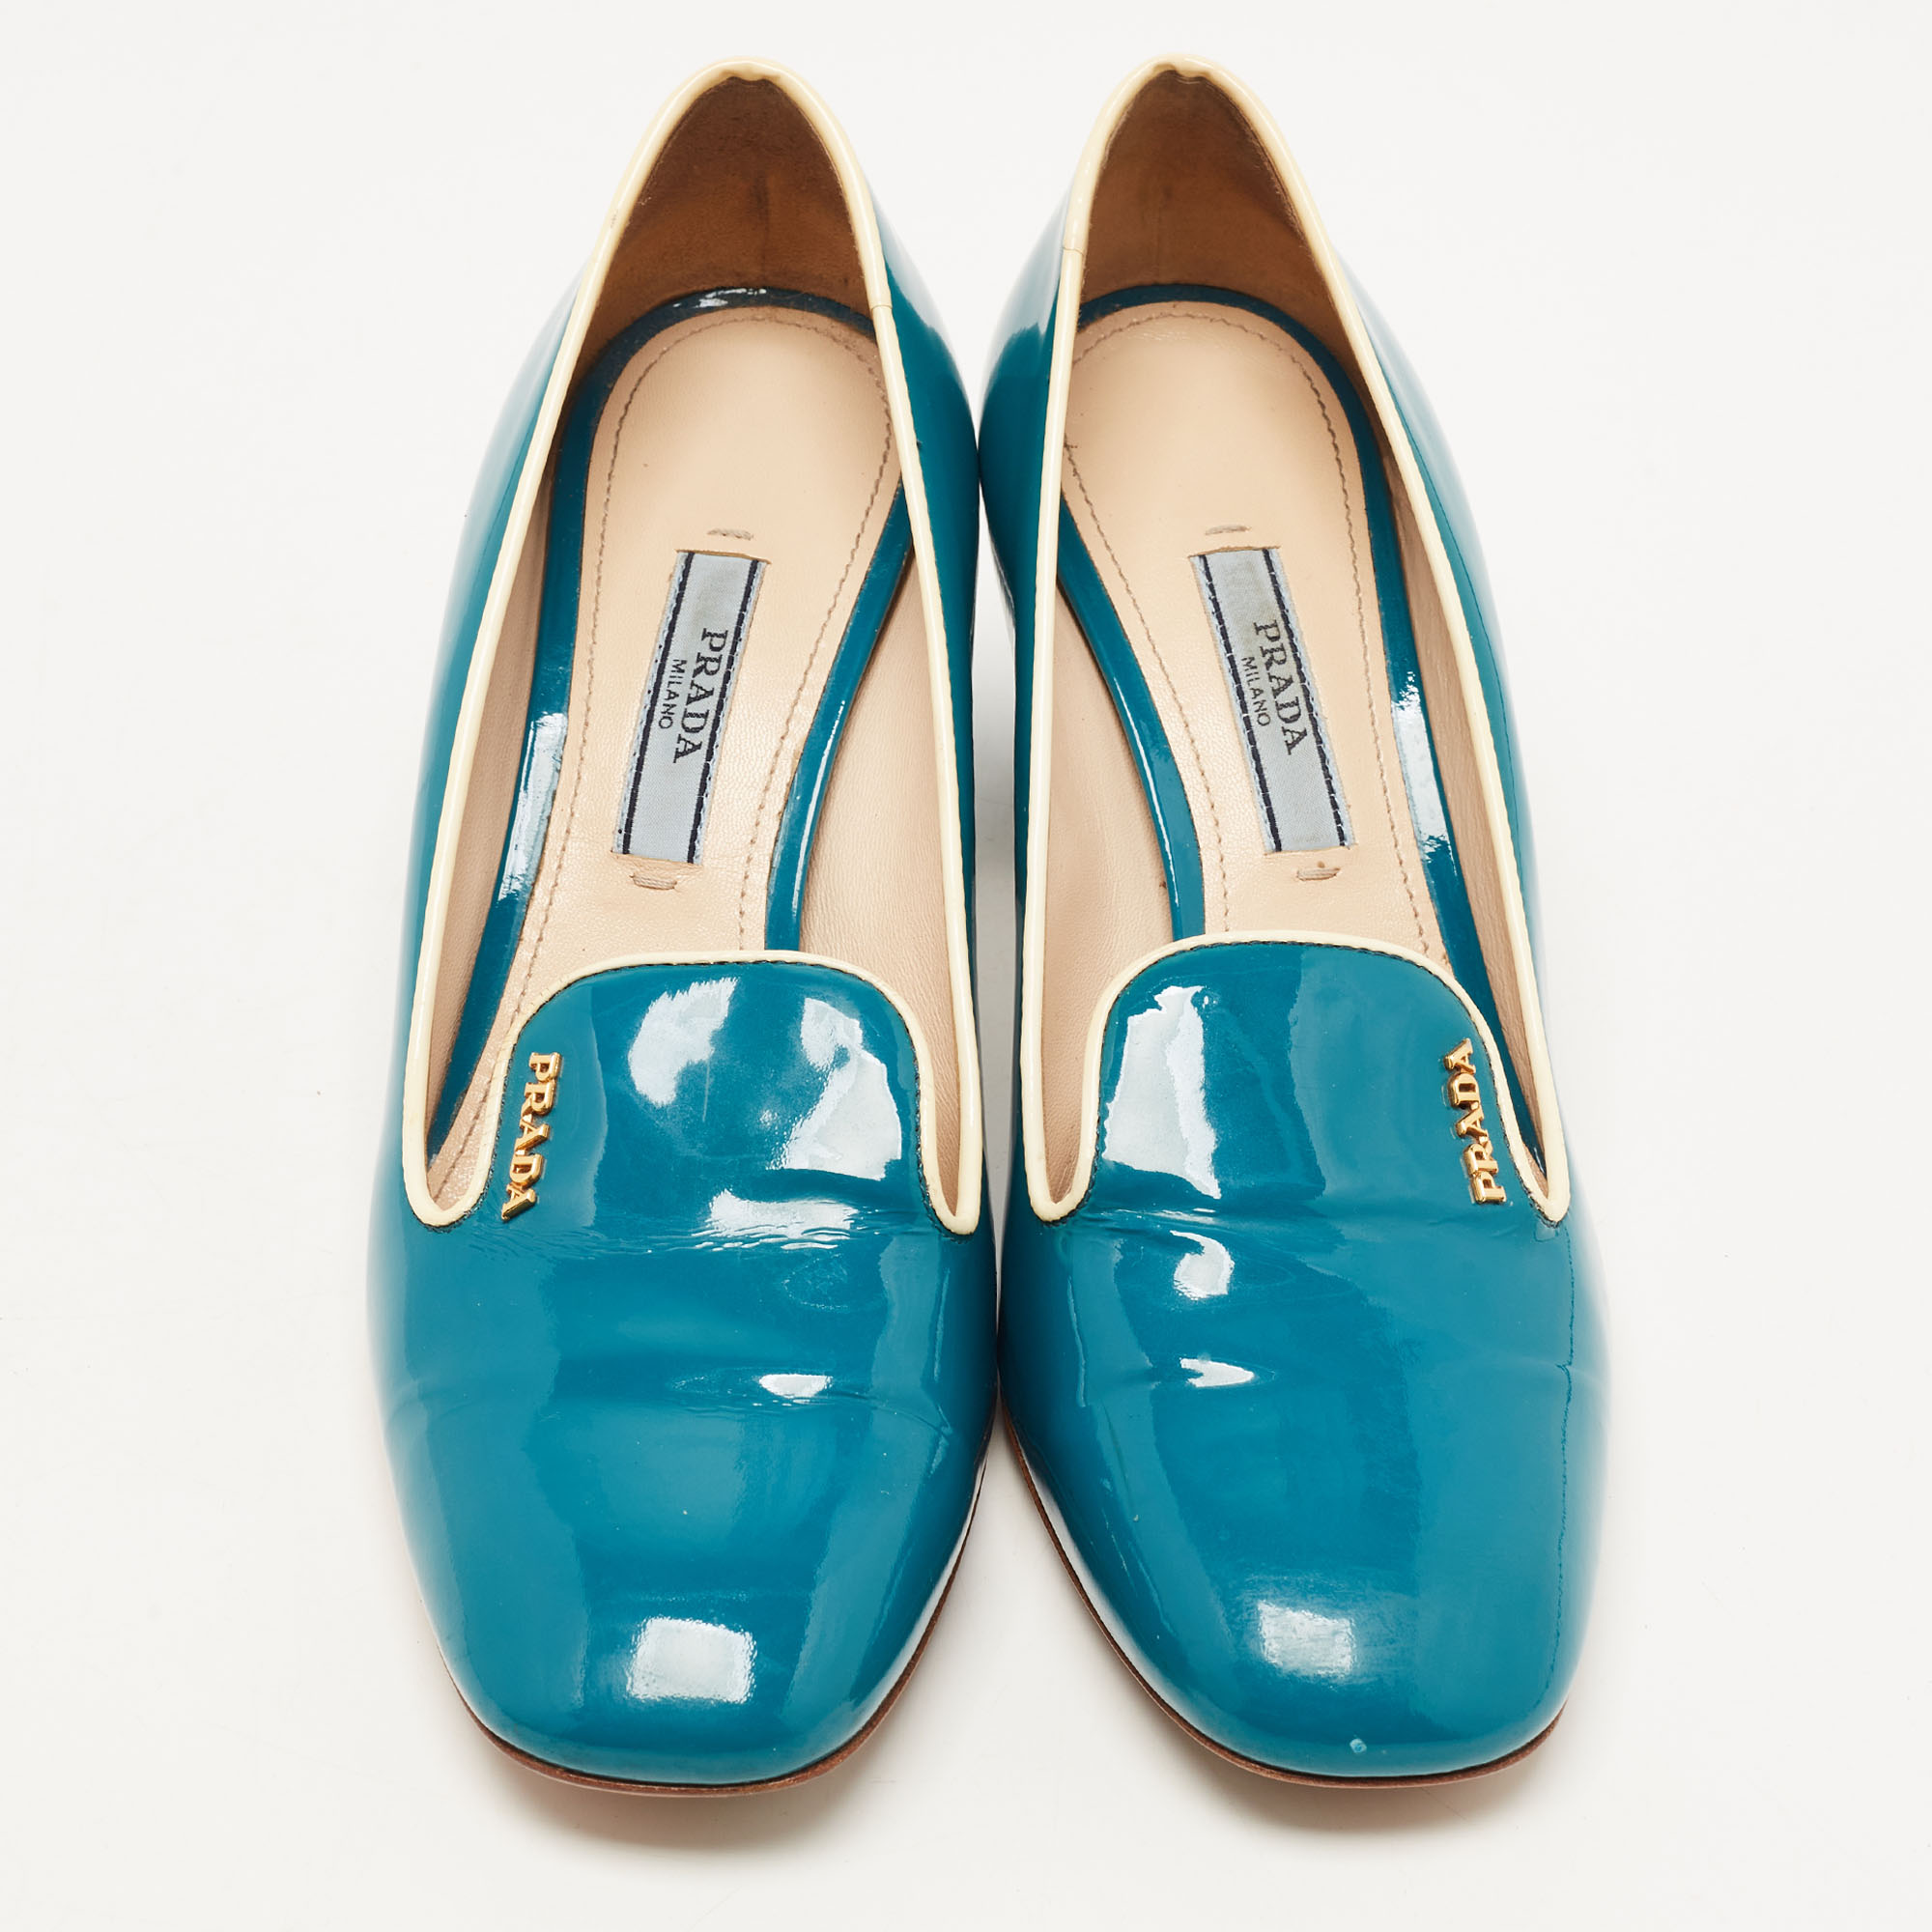 Prada Teal Patent Leather Loafer Pumps Size 35.5